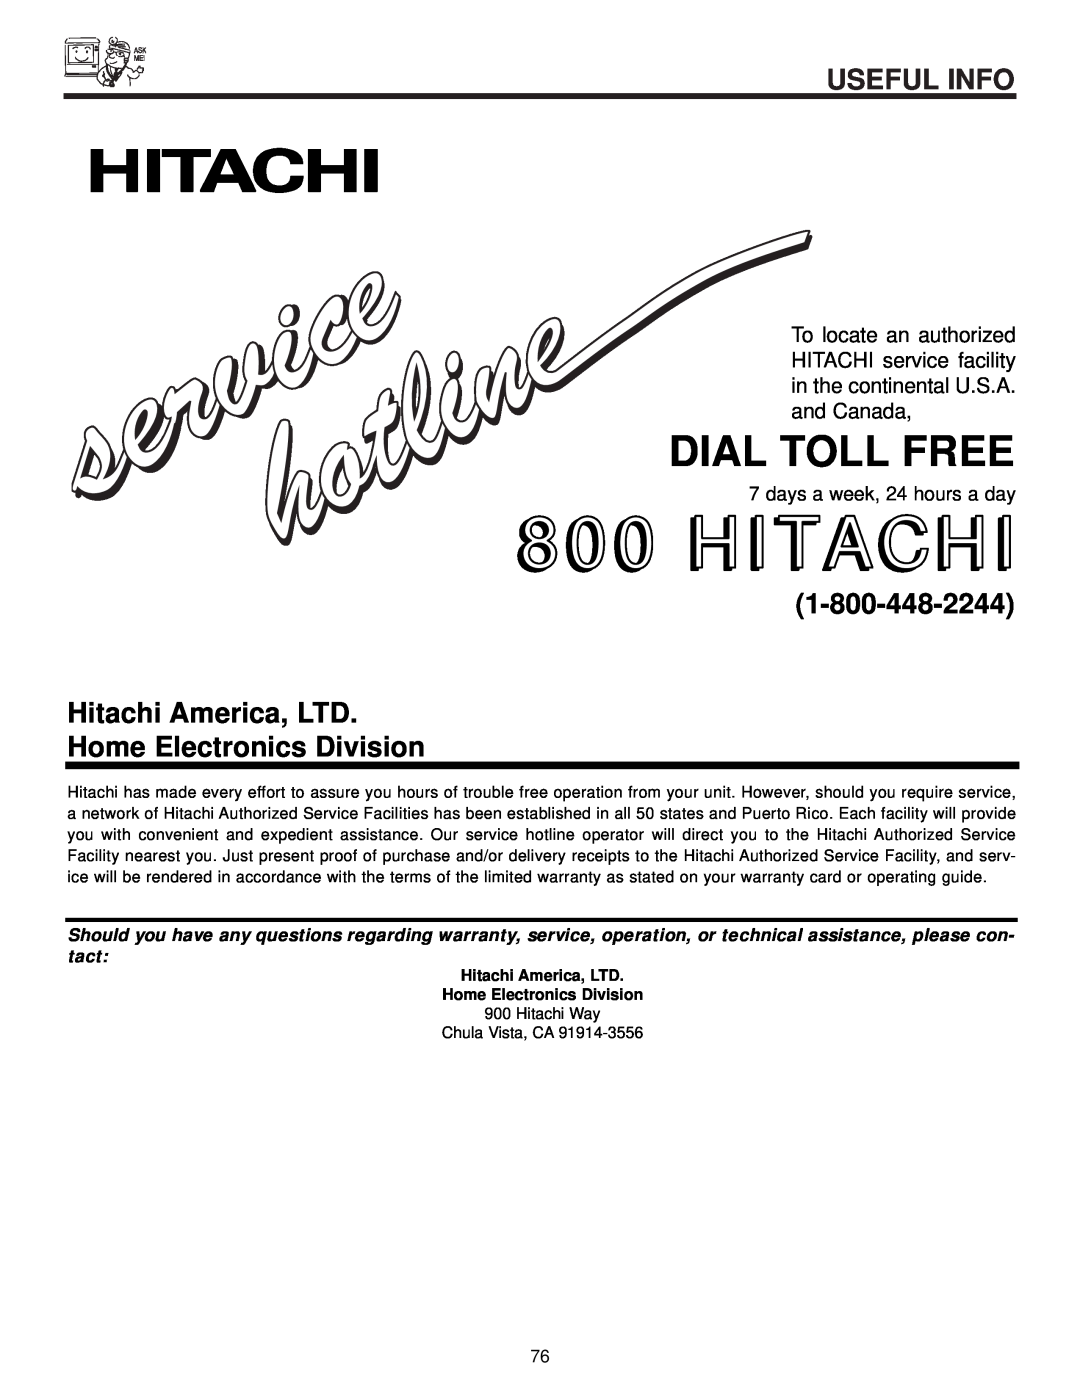 Hitachi 57T500A Home Electronics Division, Hitachi, Dial Toll Free, Useful Info, days a week, 24 hours a day 